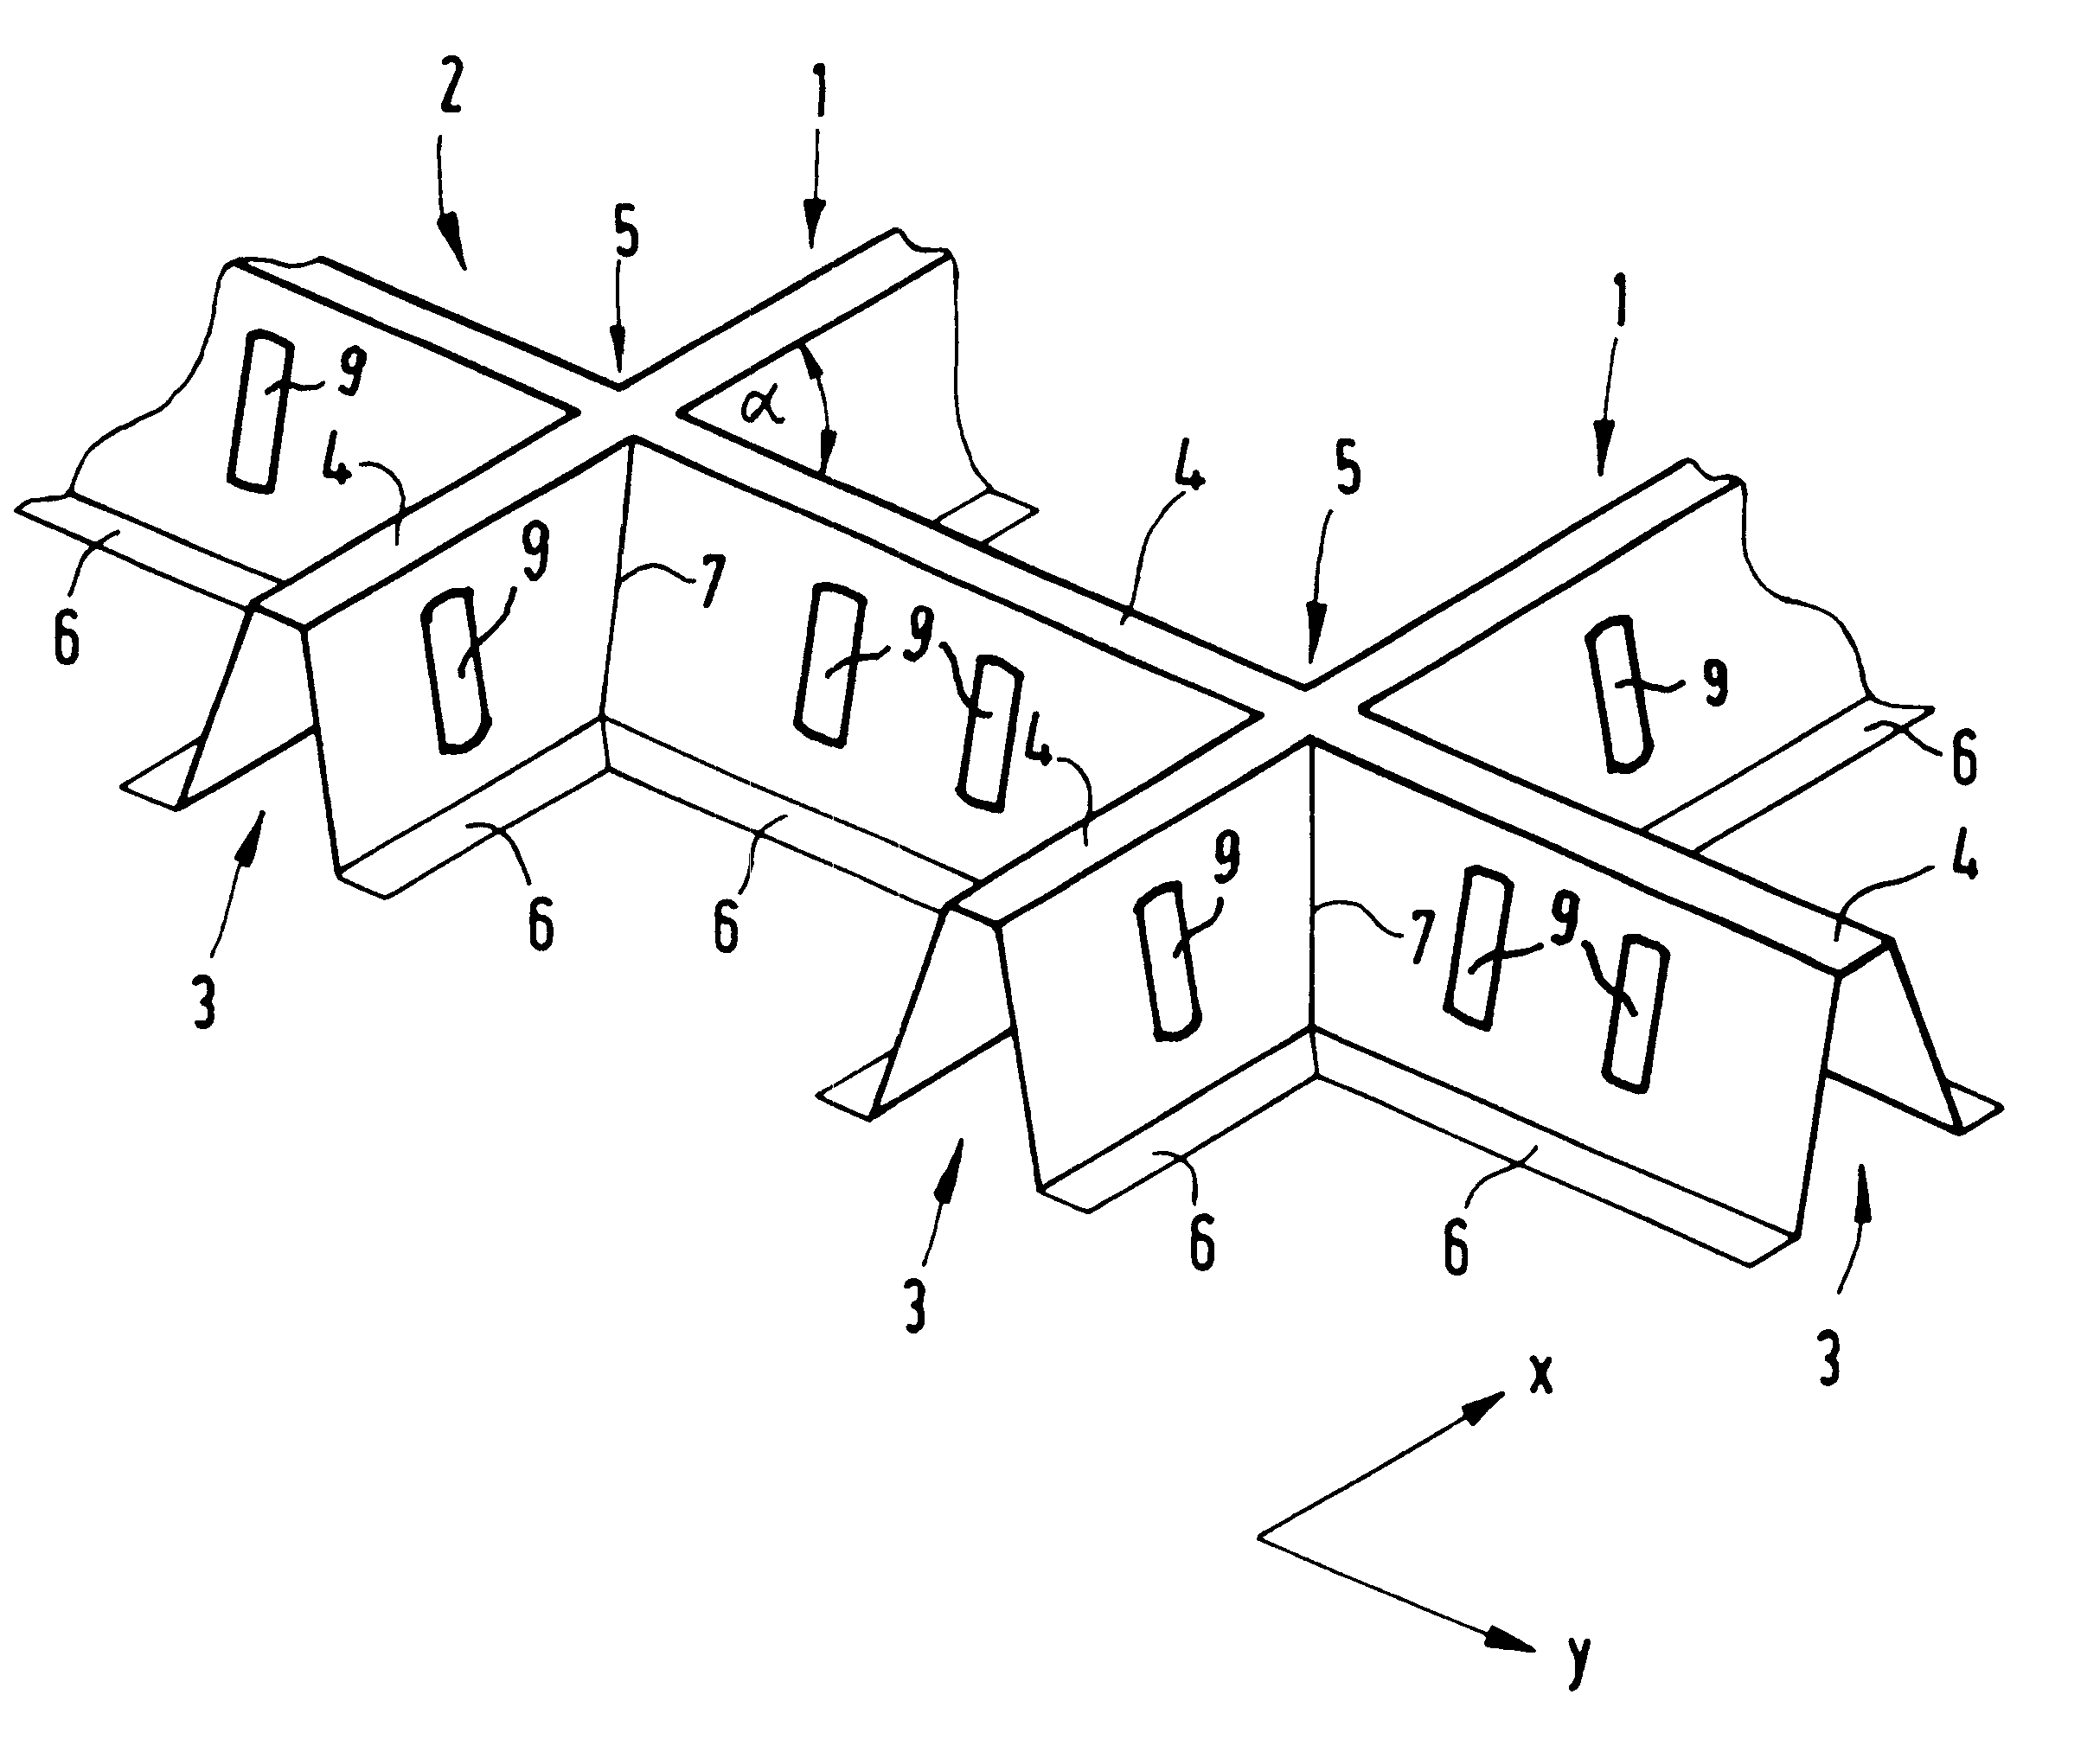 Subfloor structure of an aircraft airframe